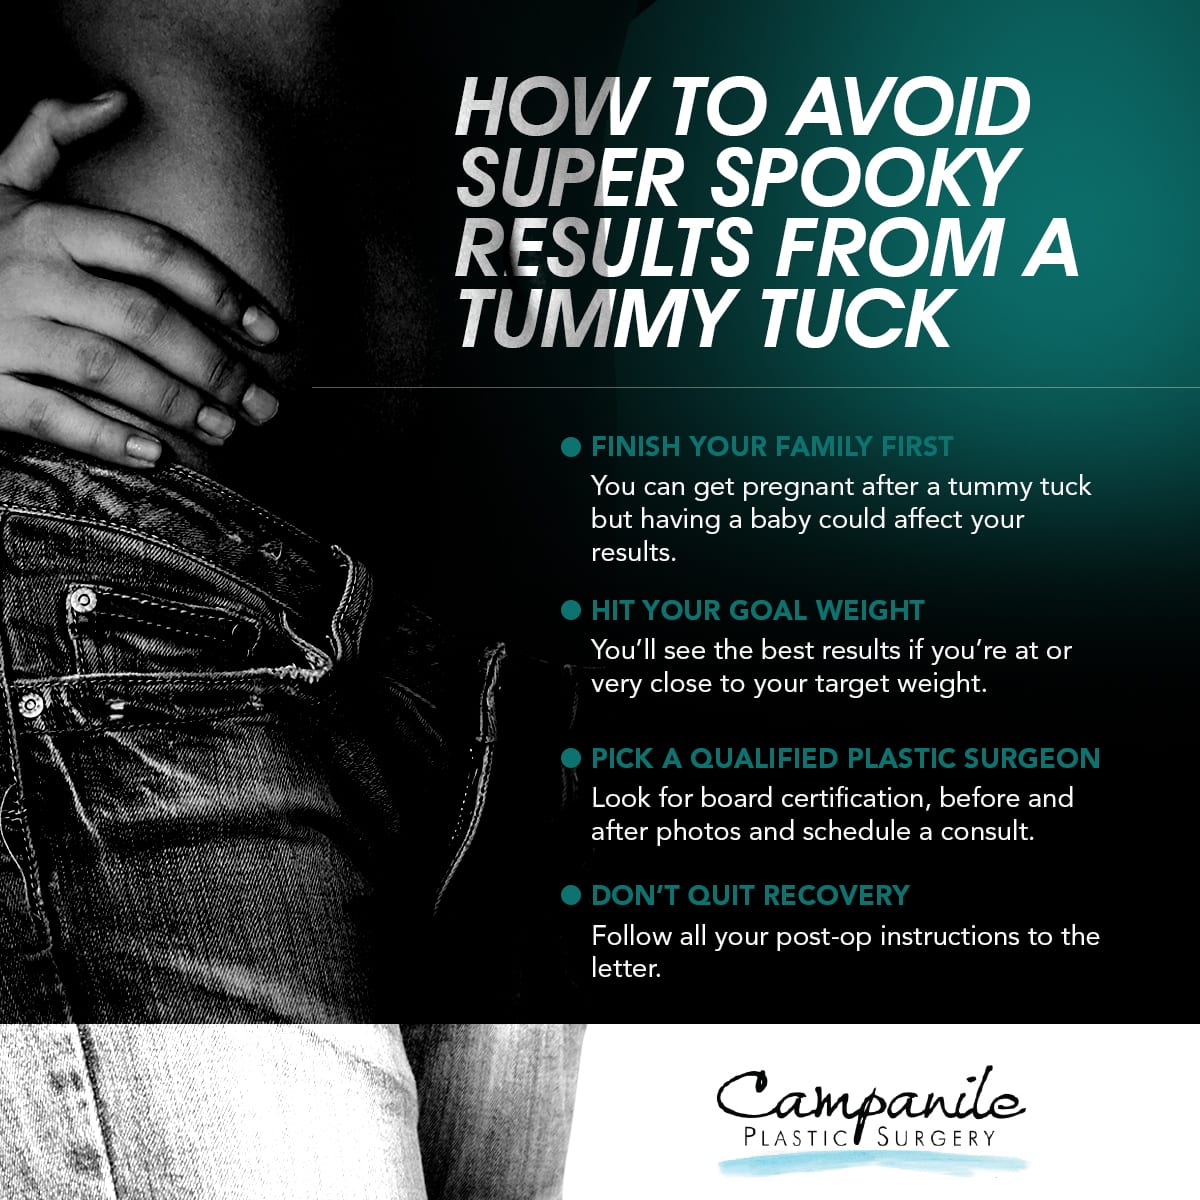 How to Avoid Super Spooky Results from a Tummy Tuck [Infographic]